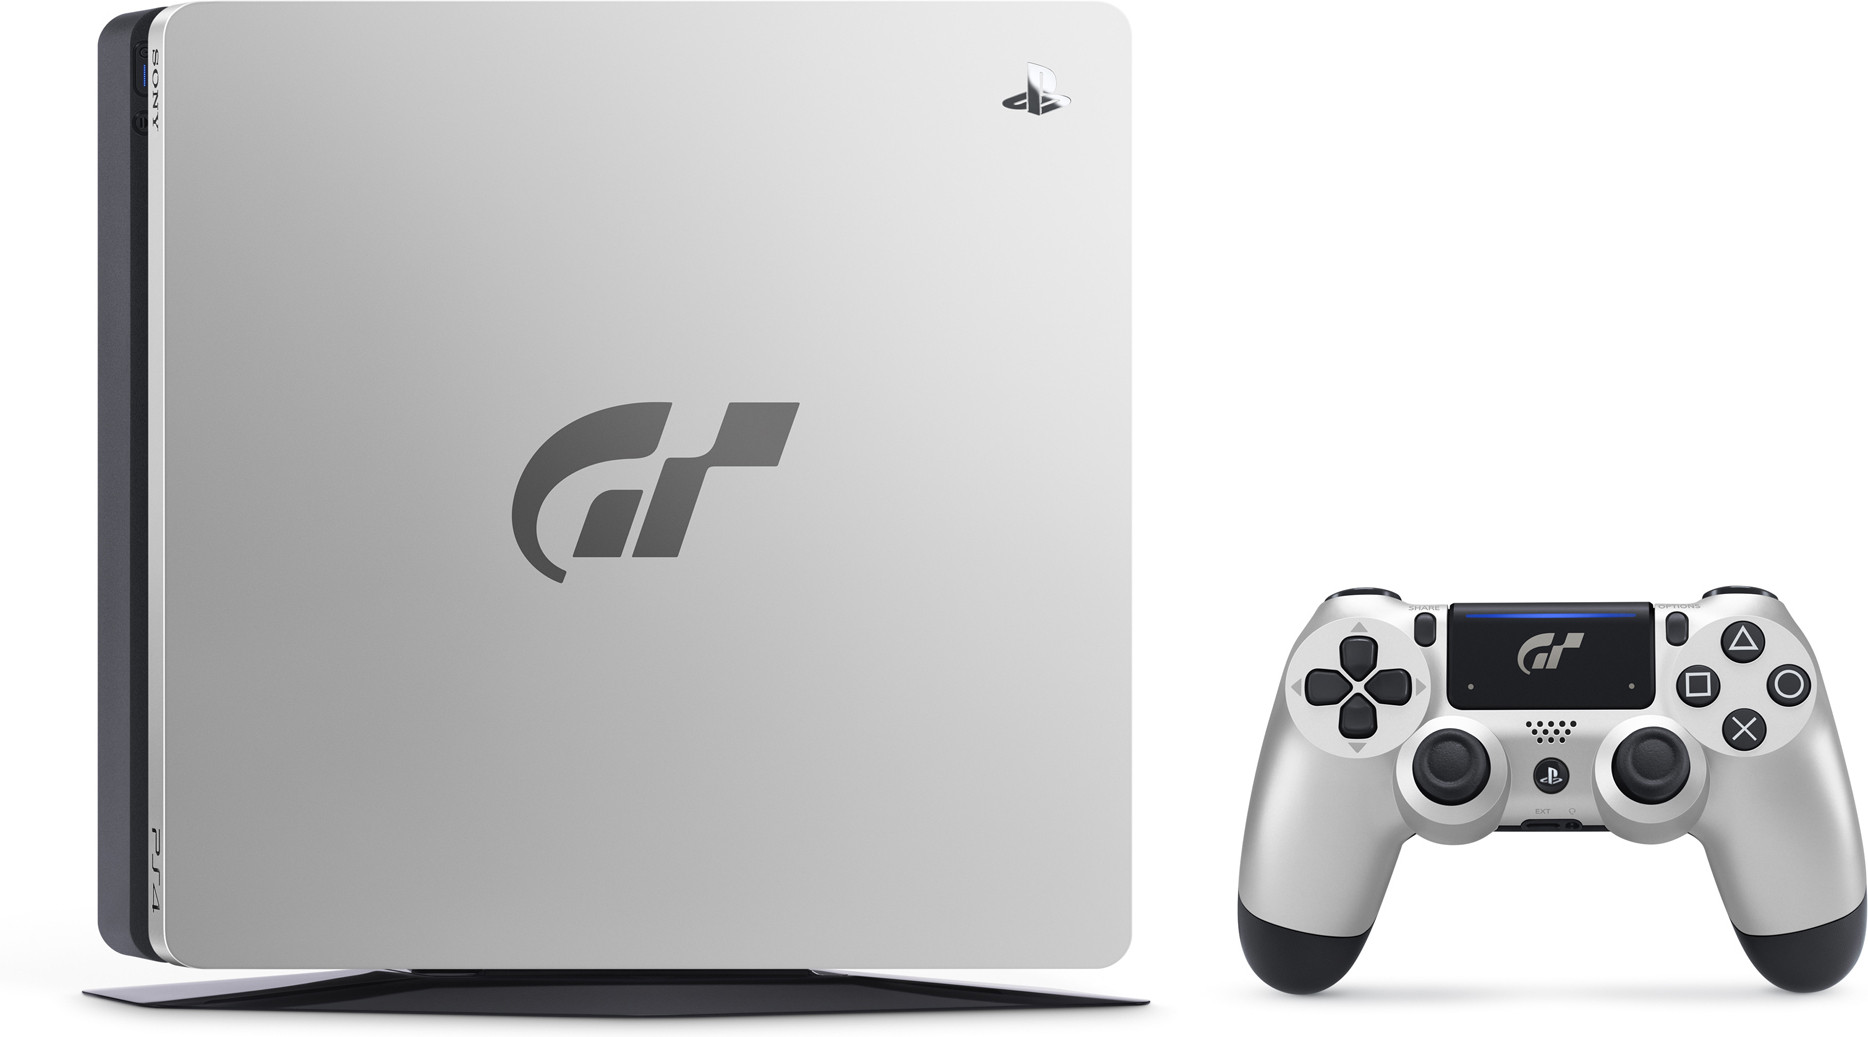 PlayStation 4 Slim 1TB Limited Edition Gran Turismo Sport (schade aan product)